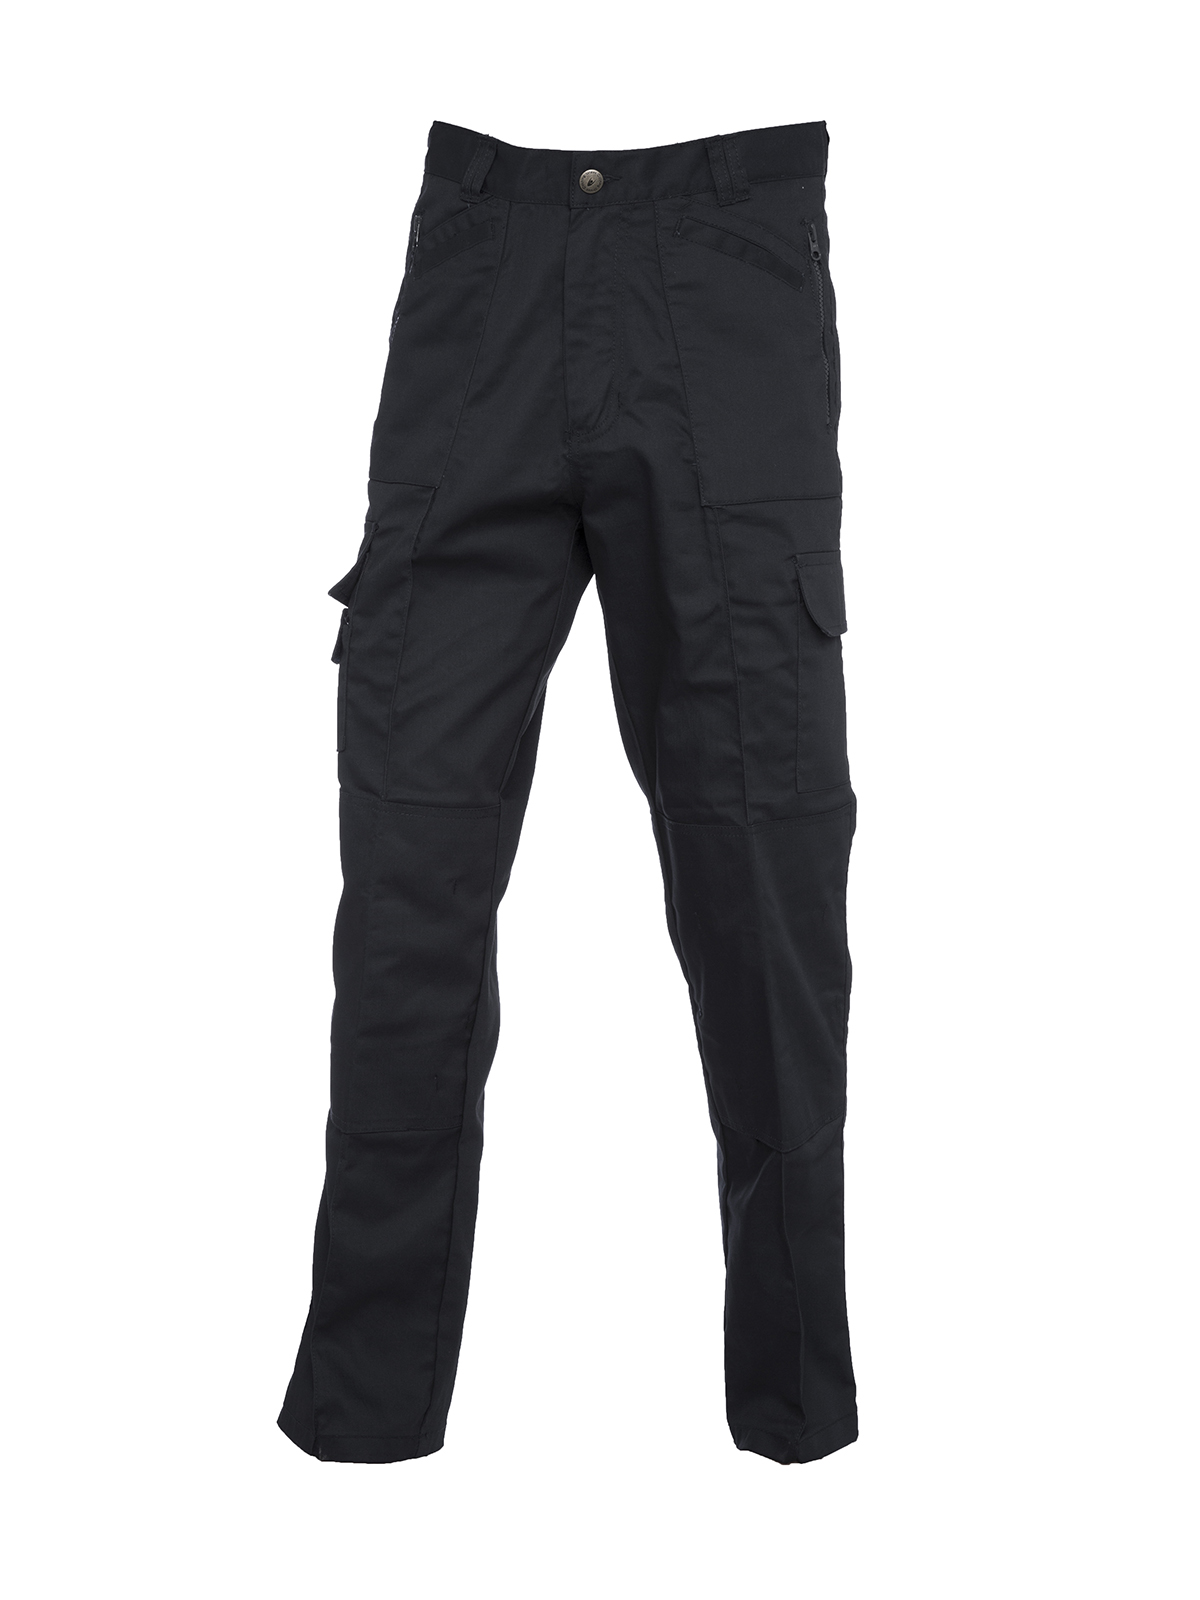 Action Trouser Long / Regular | Workwear, Trousers | Embroidery In House